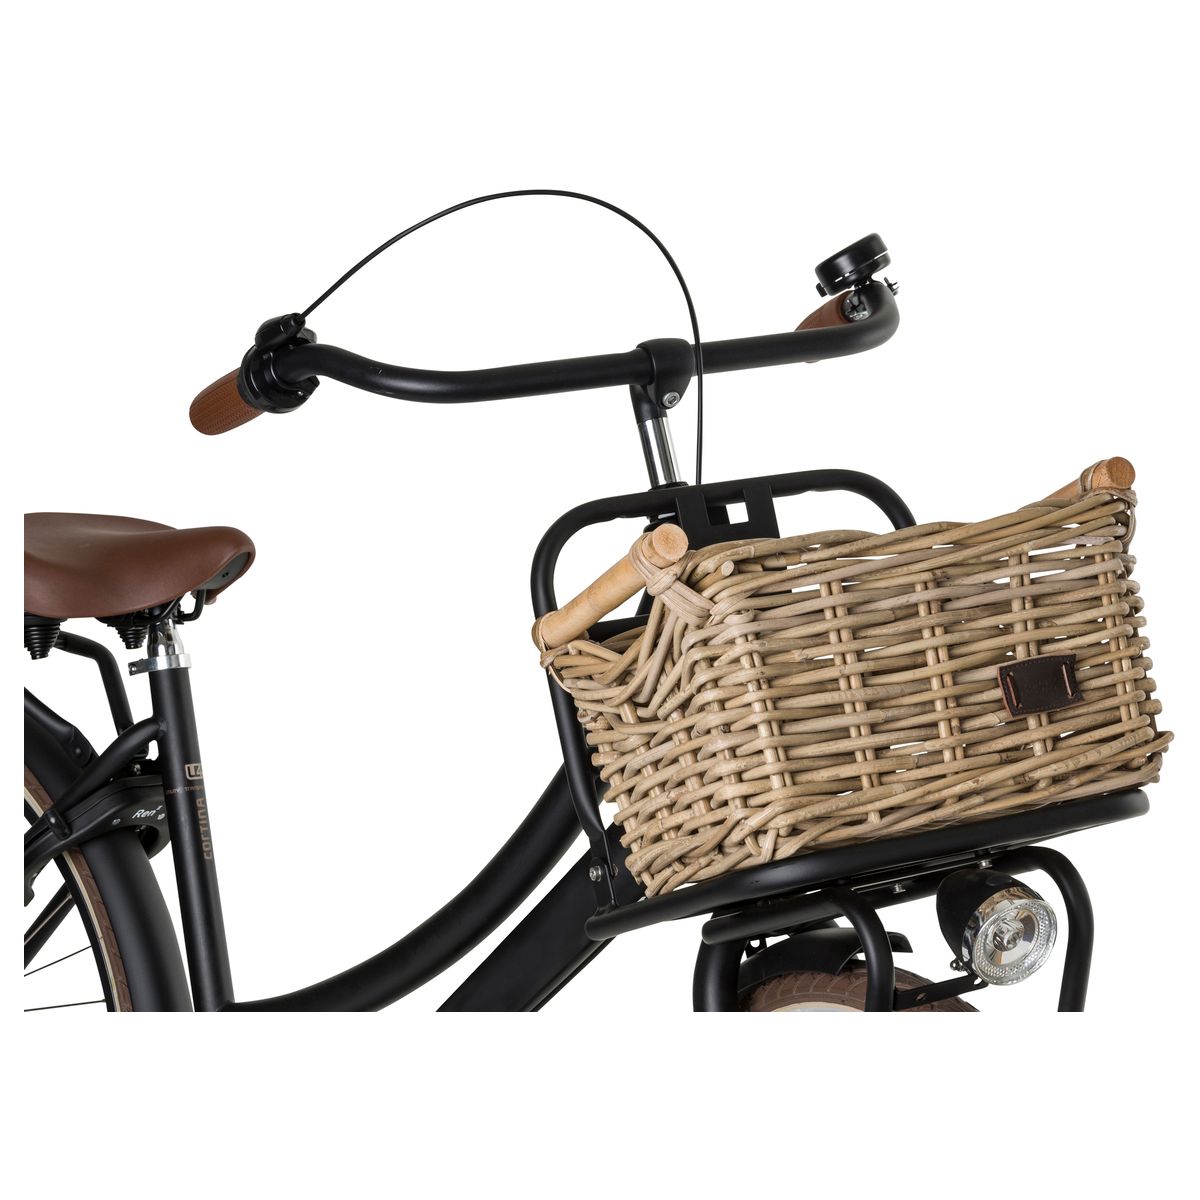 Fastrider Bamboo Rattan Bicycle basket fit example